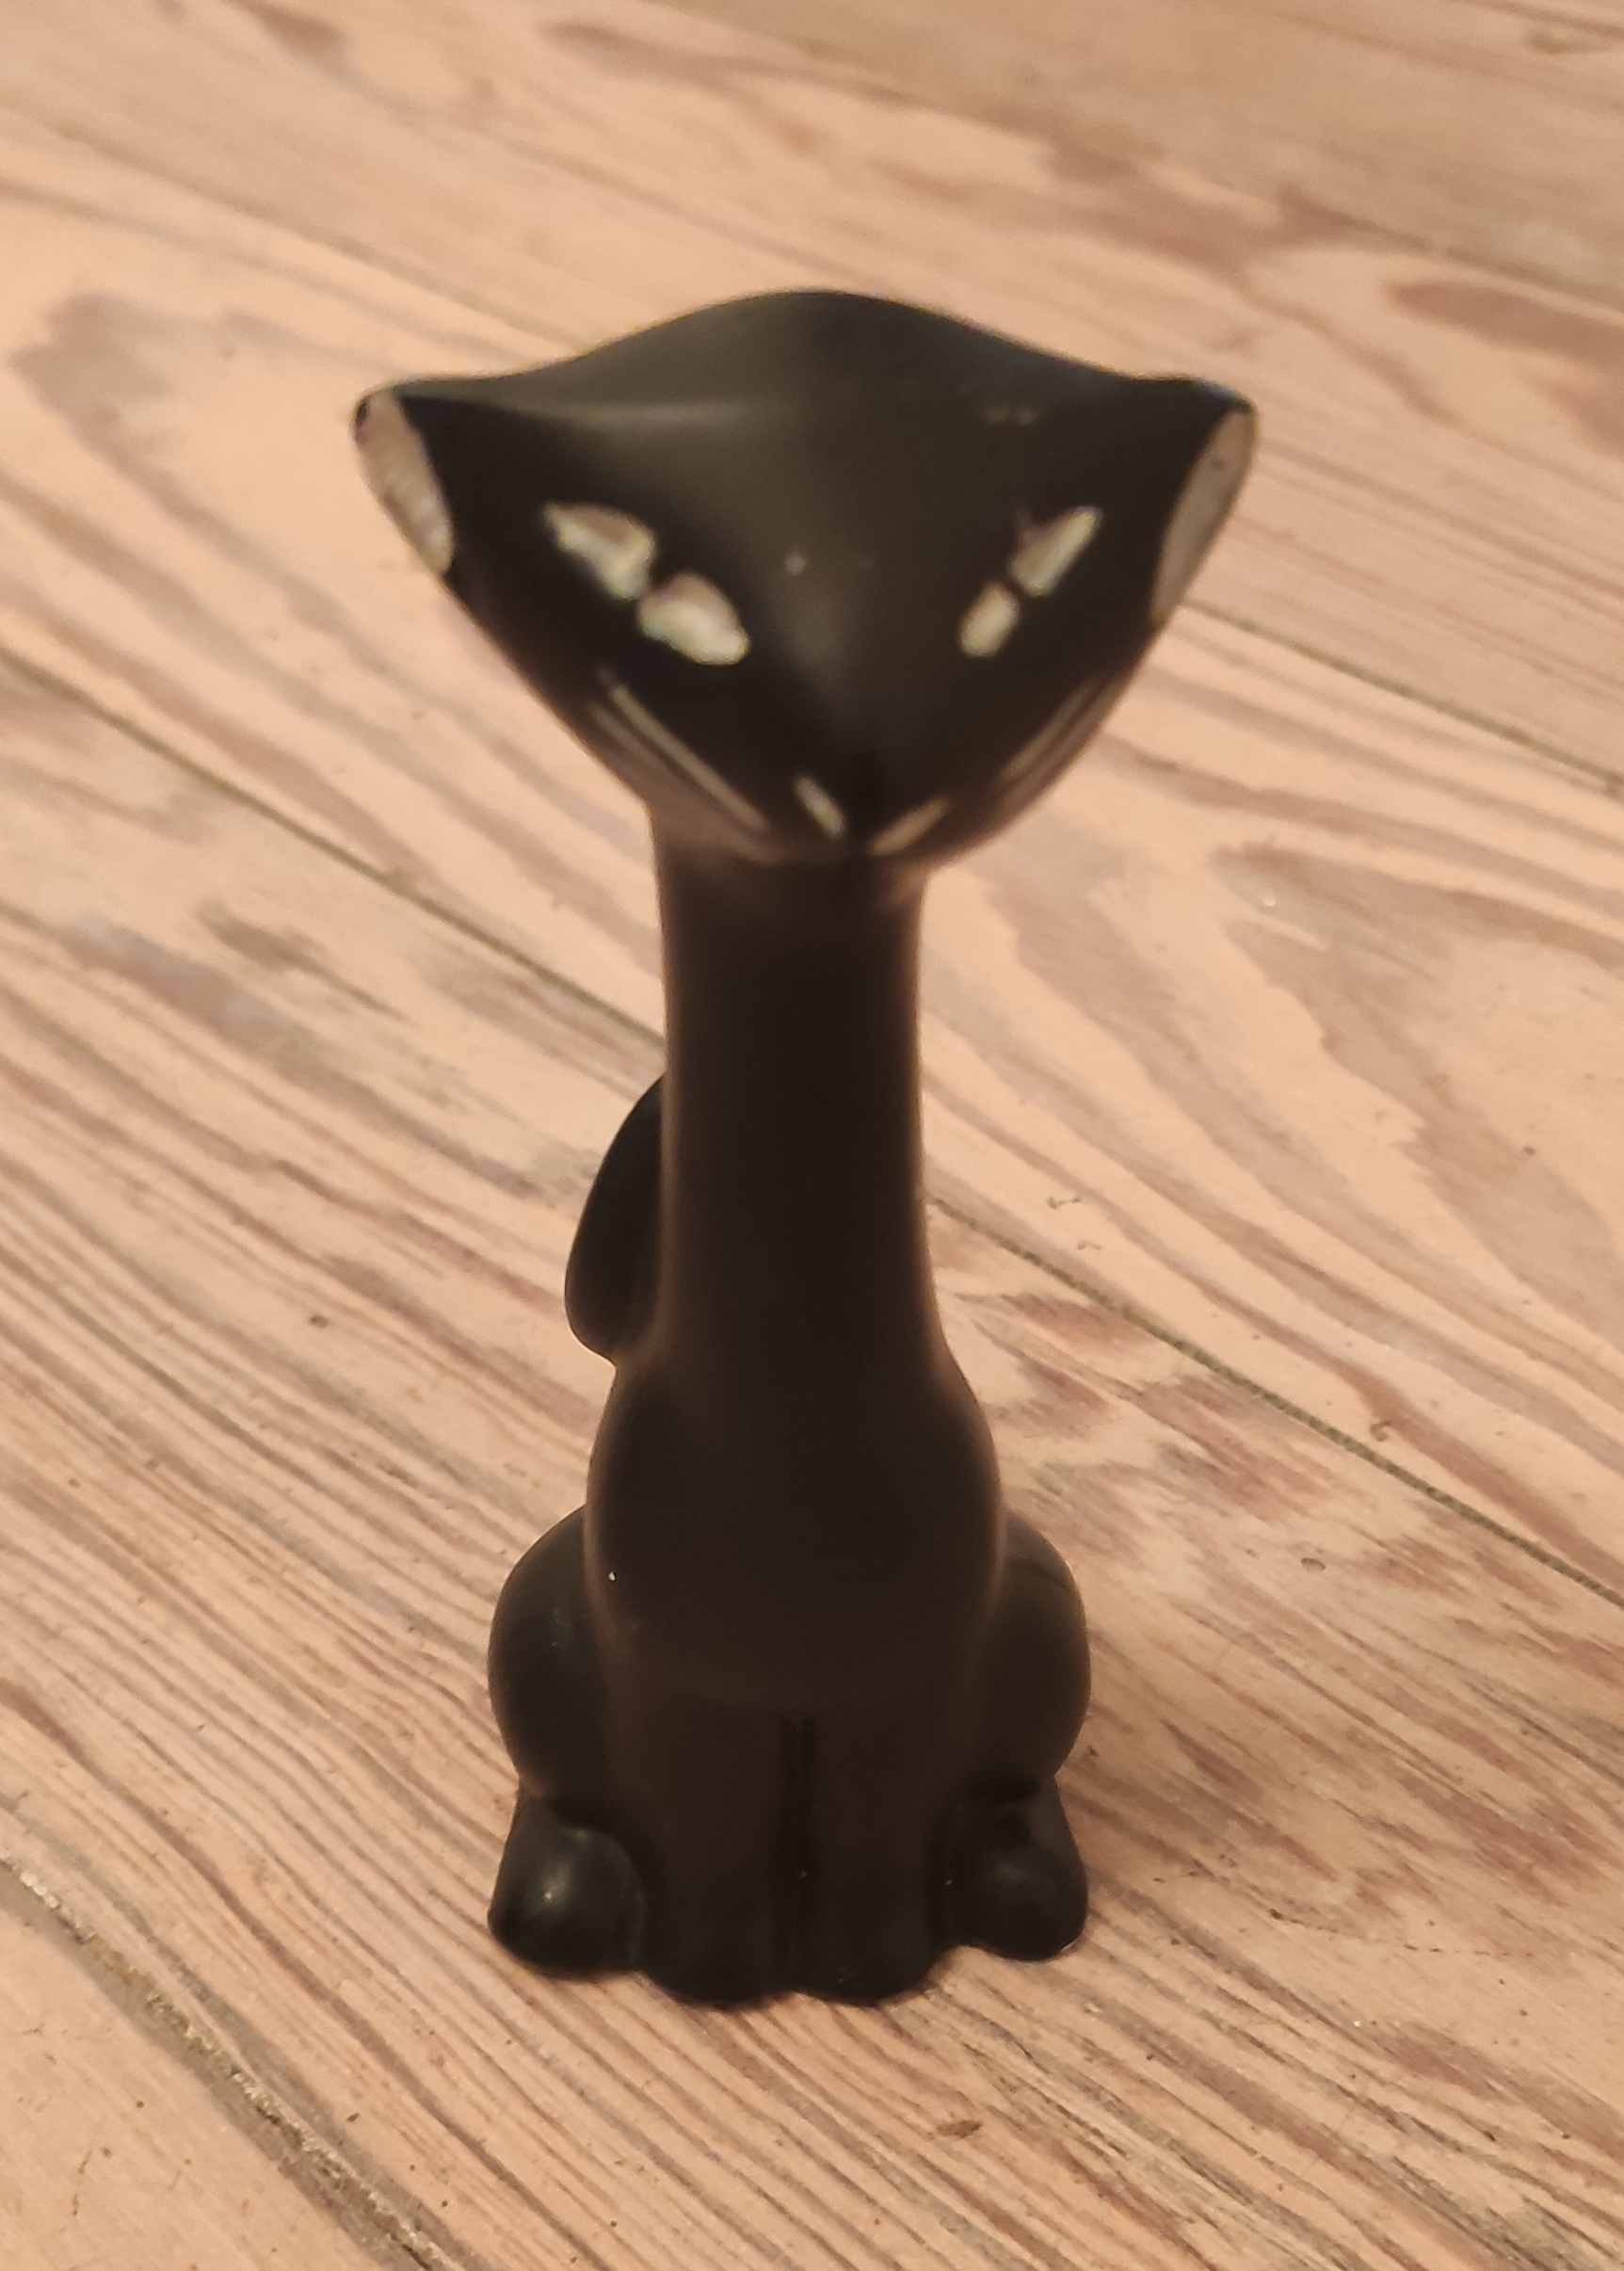 Front shot of a tall black cat figurine made of chalkware